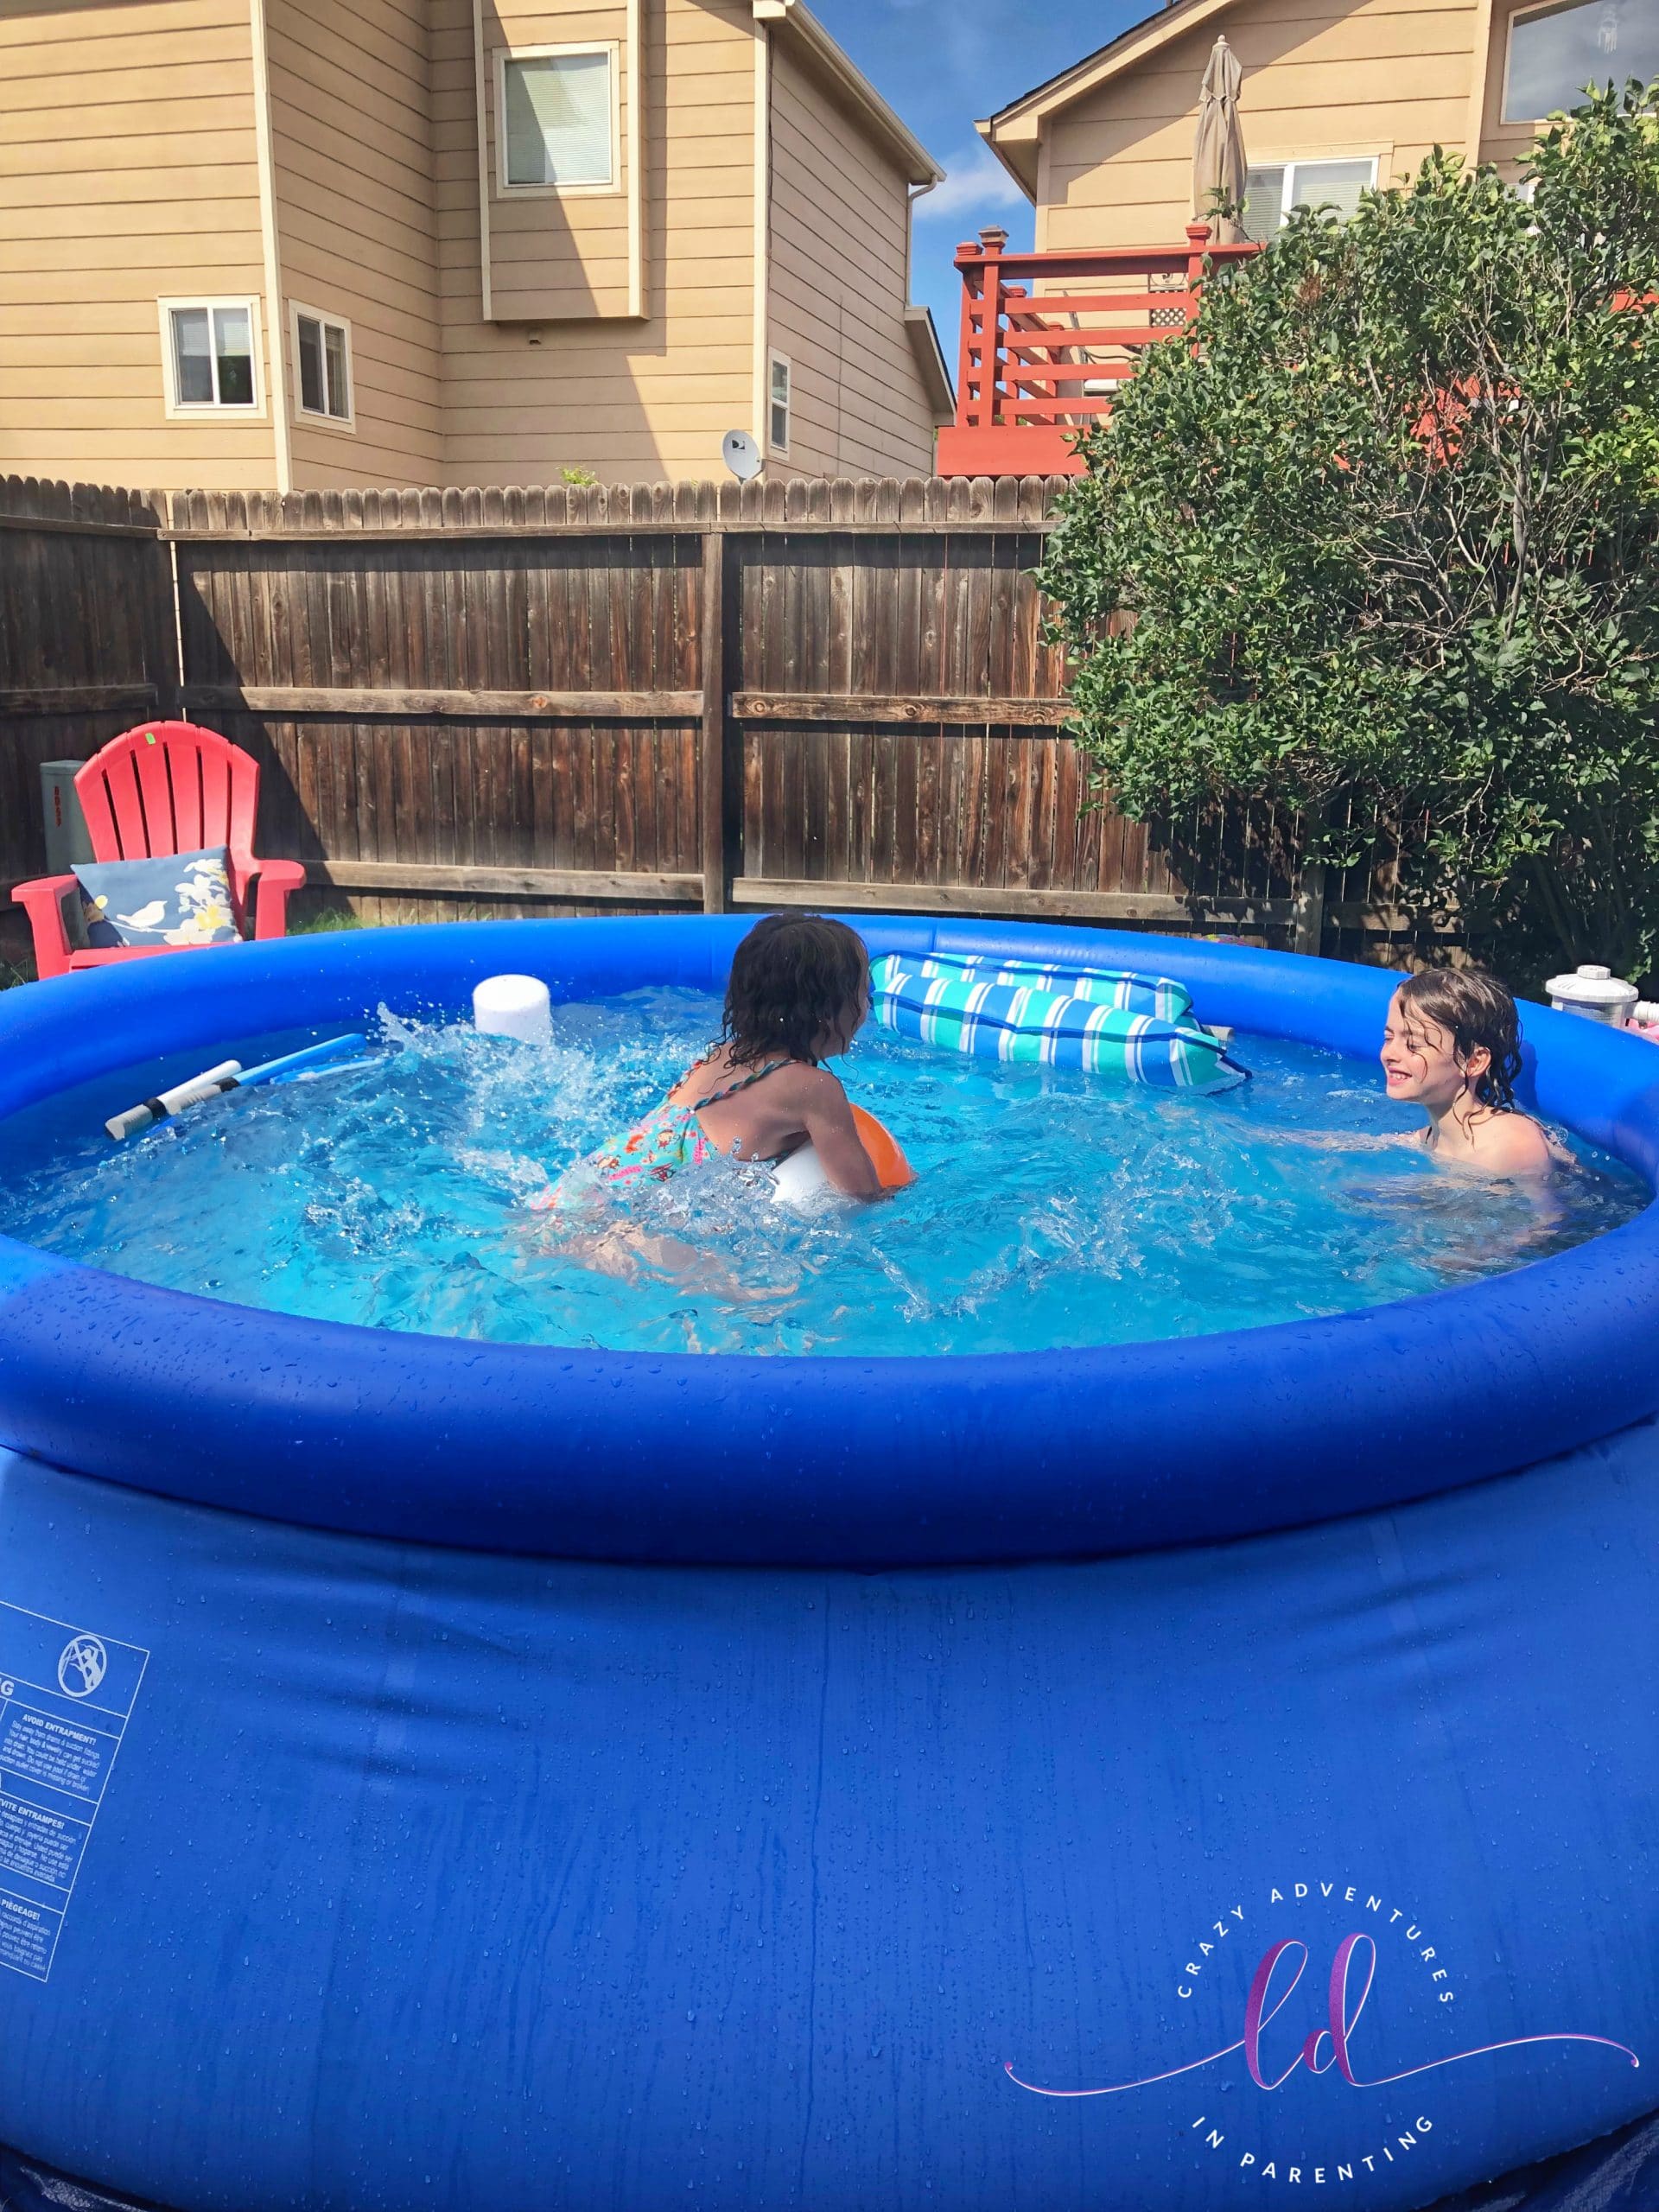 Staying cool with pool play time